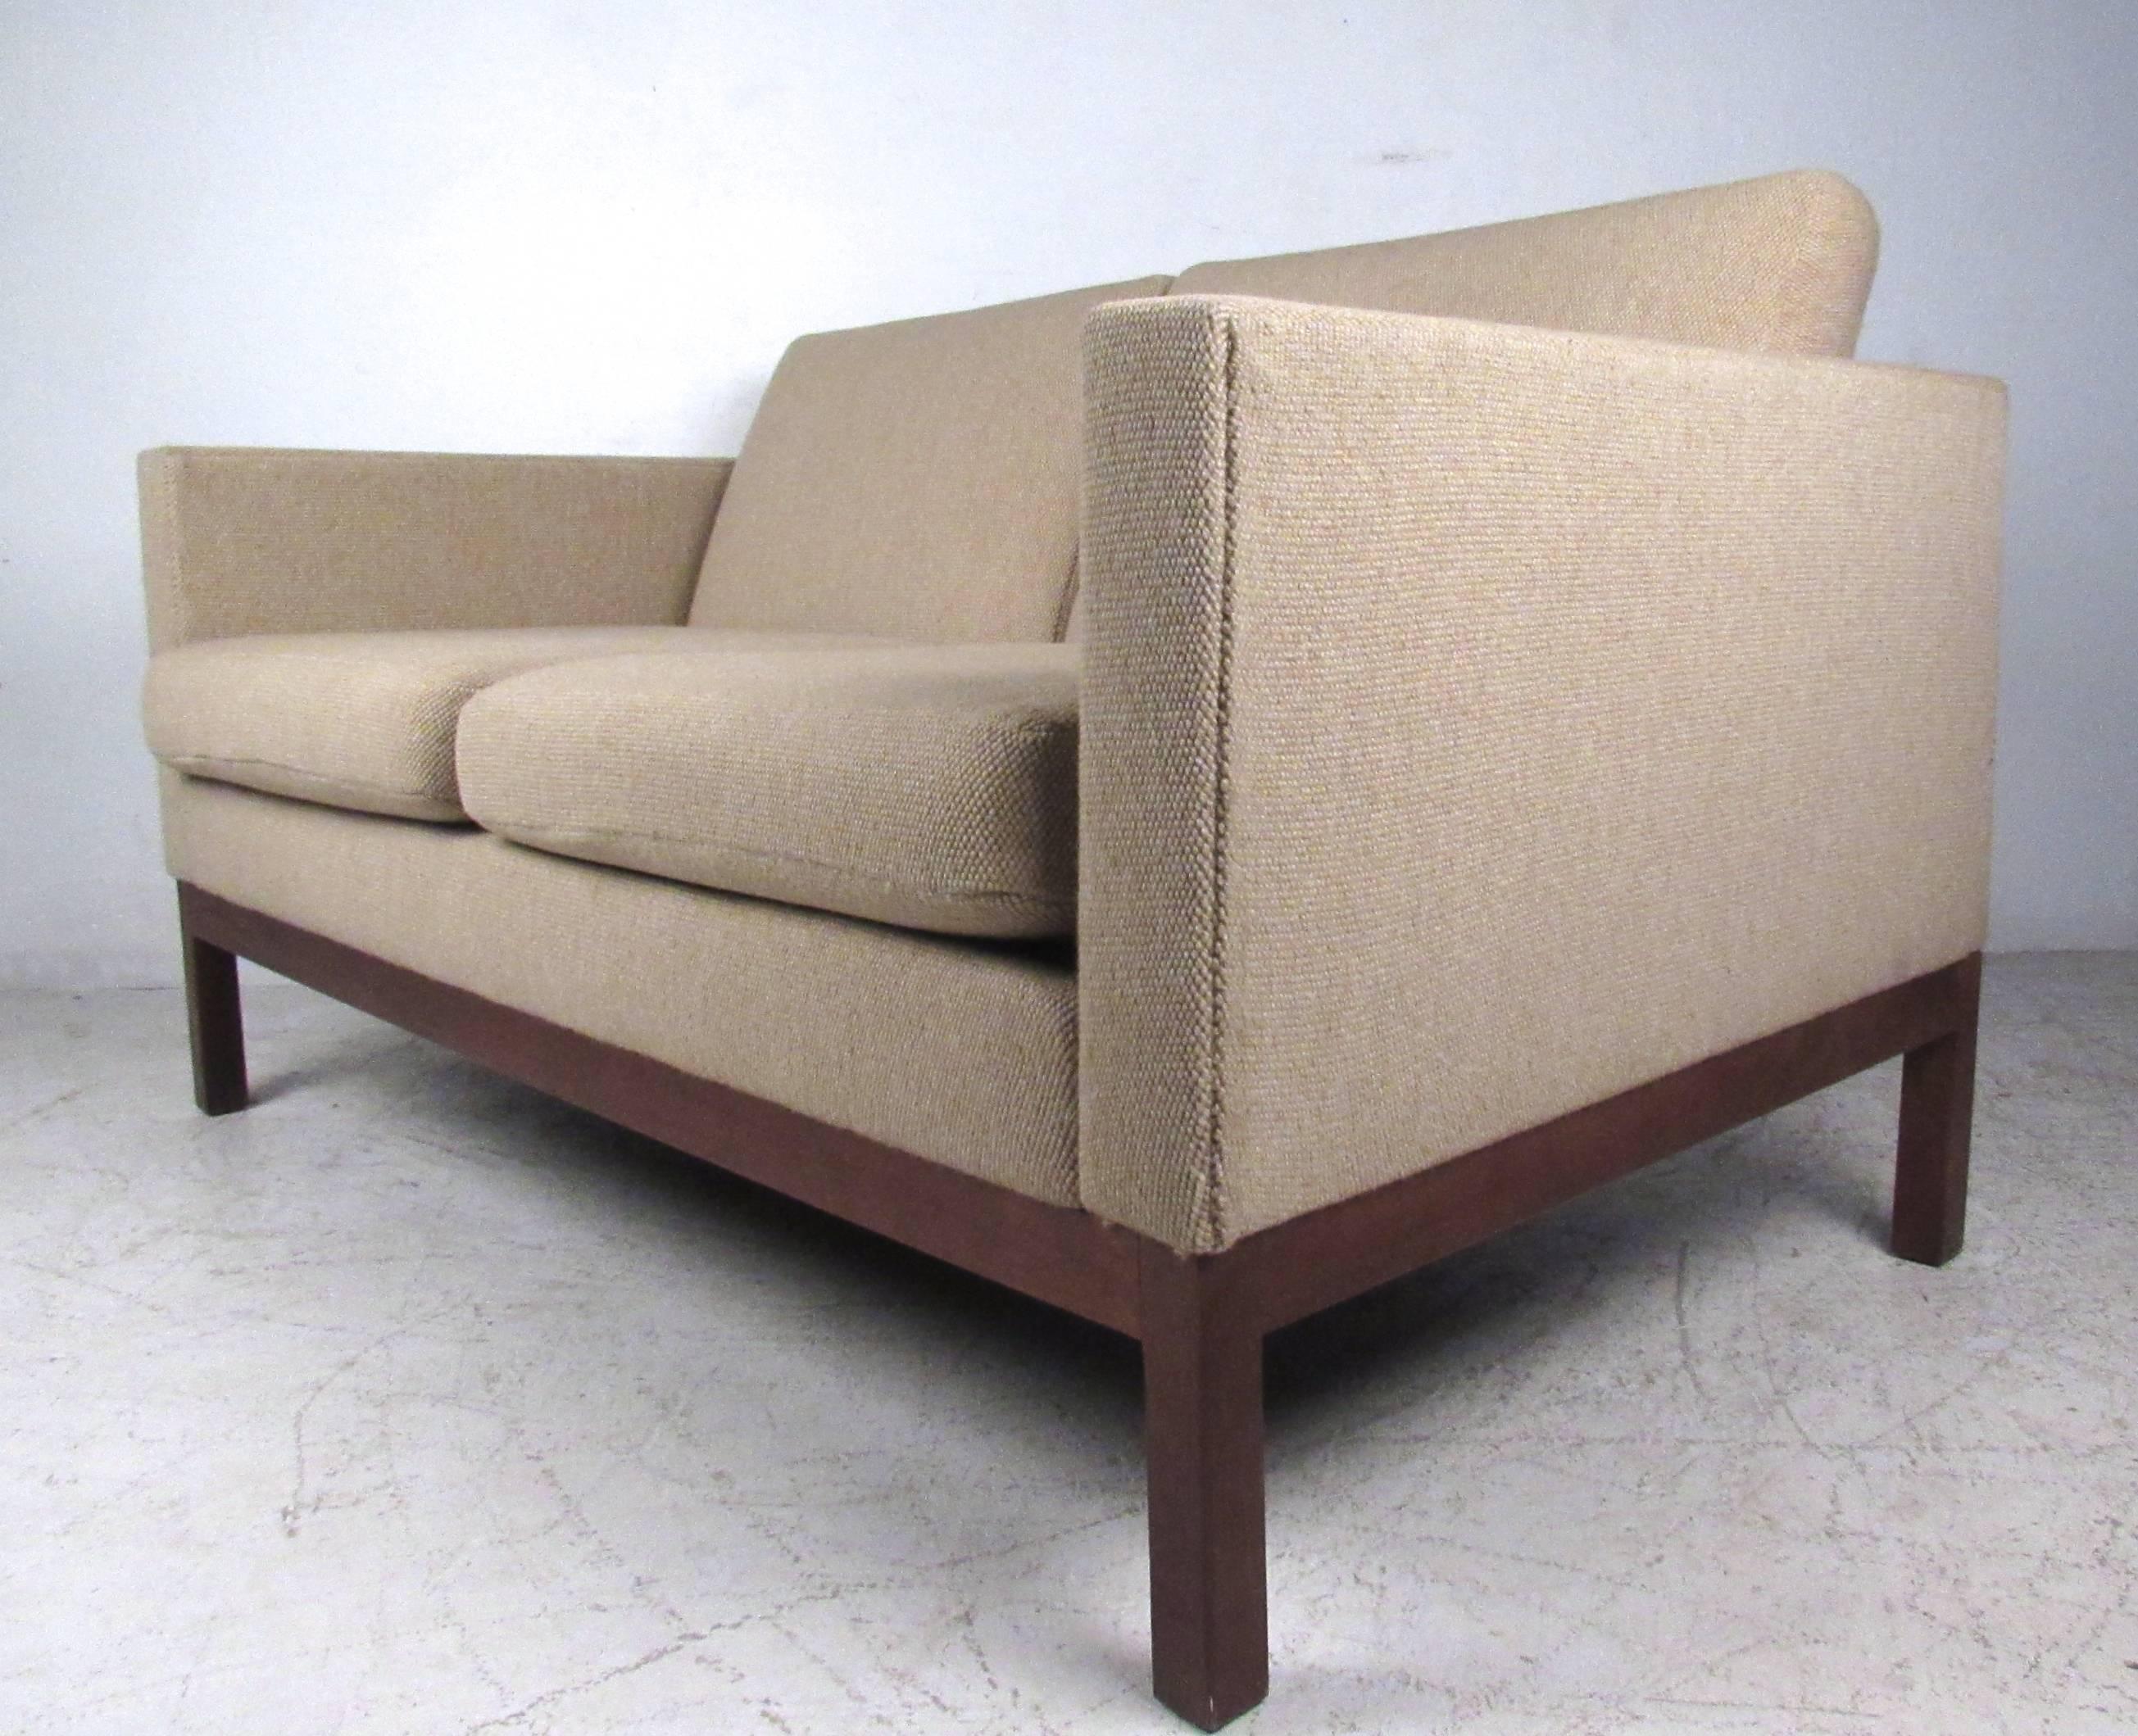 This petite vintage love seat makes a comfortable two person seating addition to any interior. Sleek design with overstuffed removable cushions and sturdy walnut legs. Quality American manufacturing, clean modern lines, and quality vintage fabric